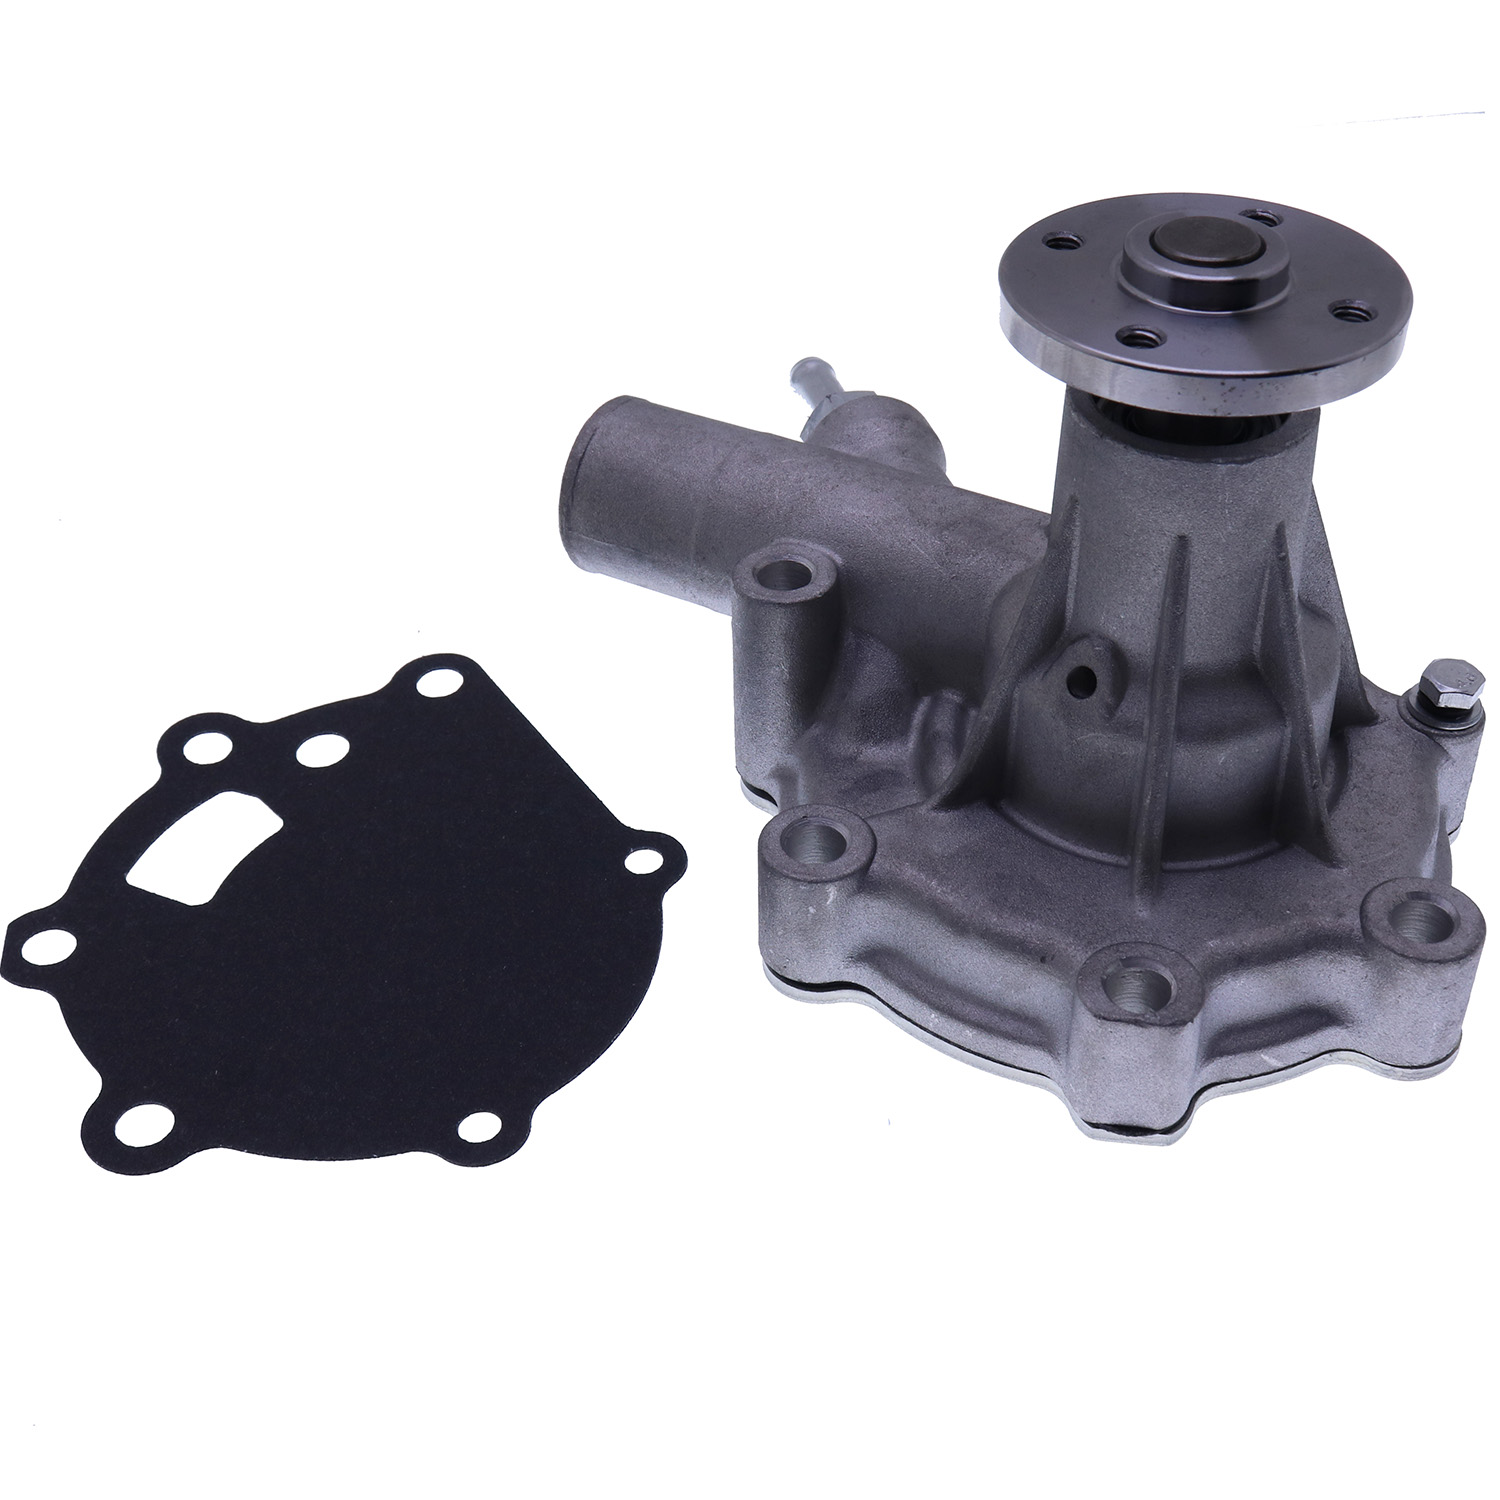 Water Pump for Tractor Satoh ST1640D ST1840 S373D S470 S2320 234 244